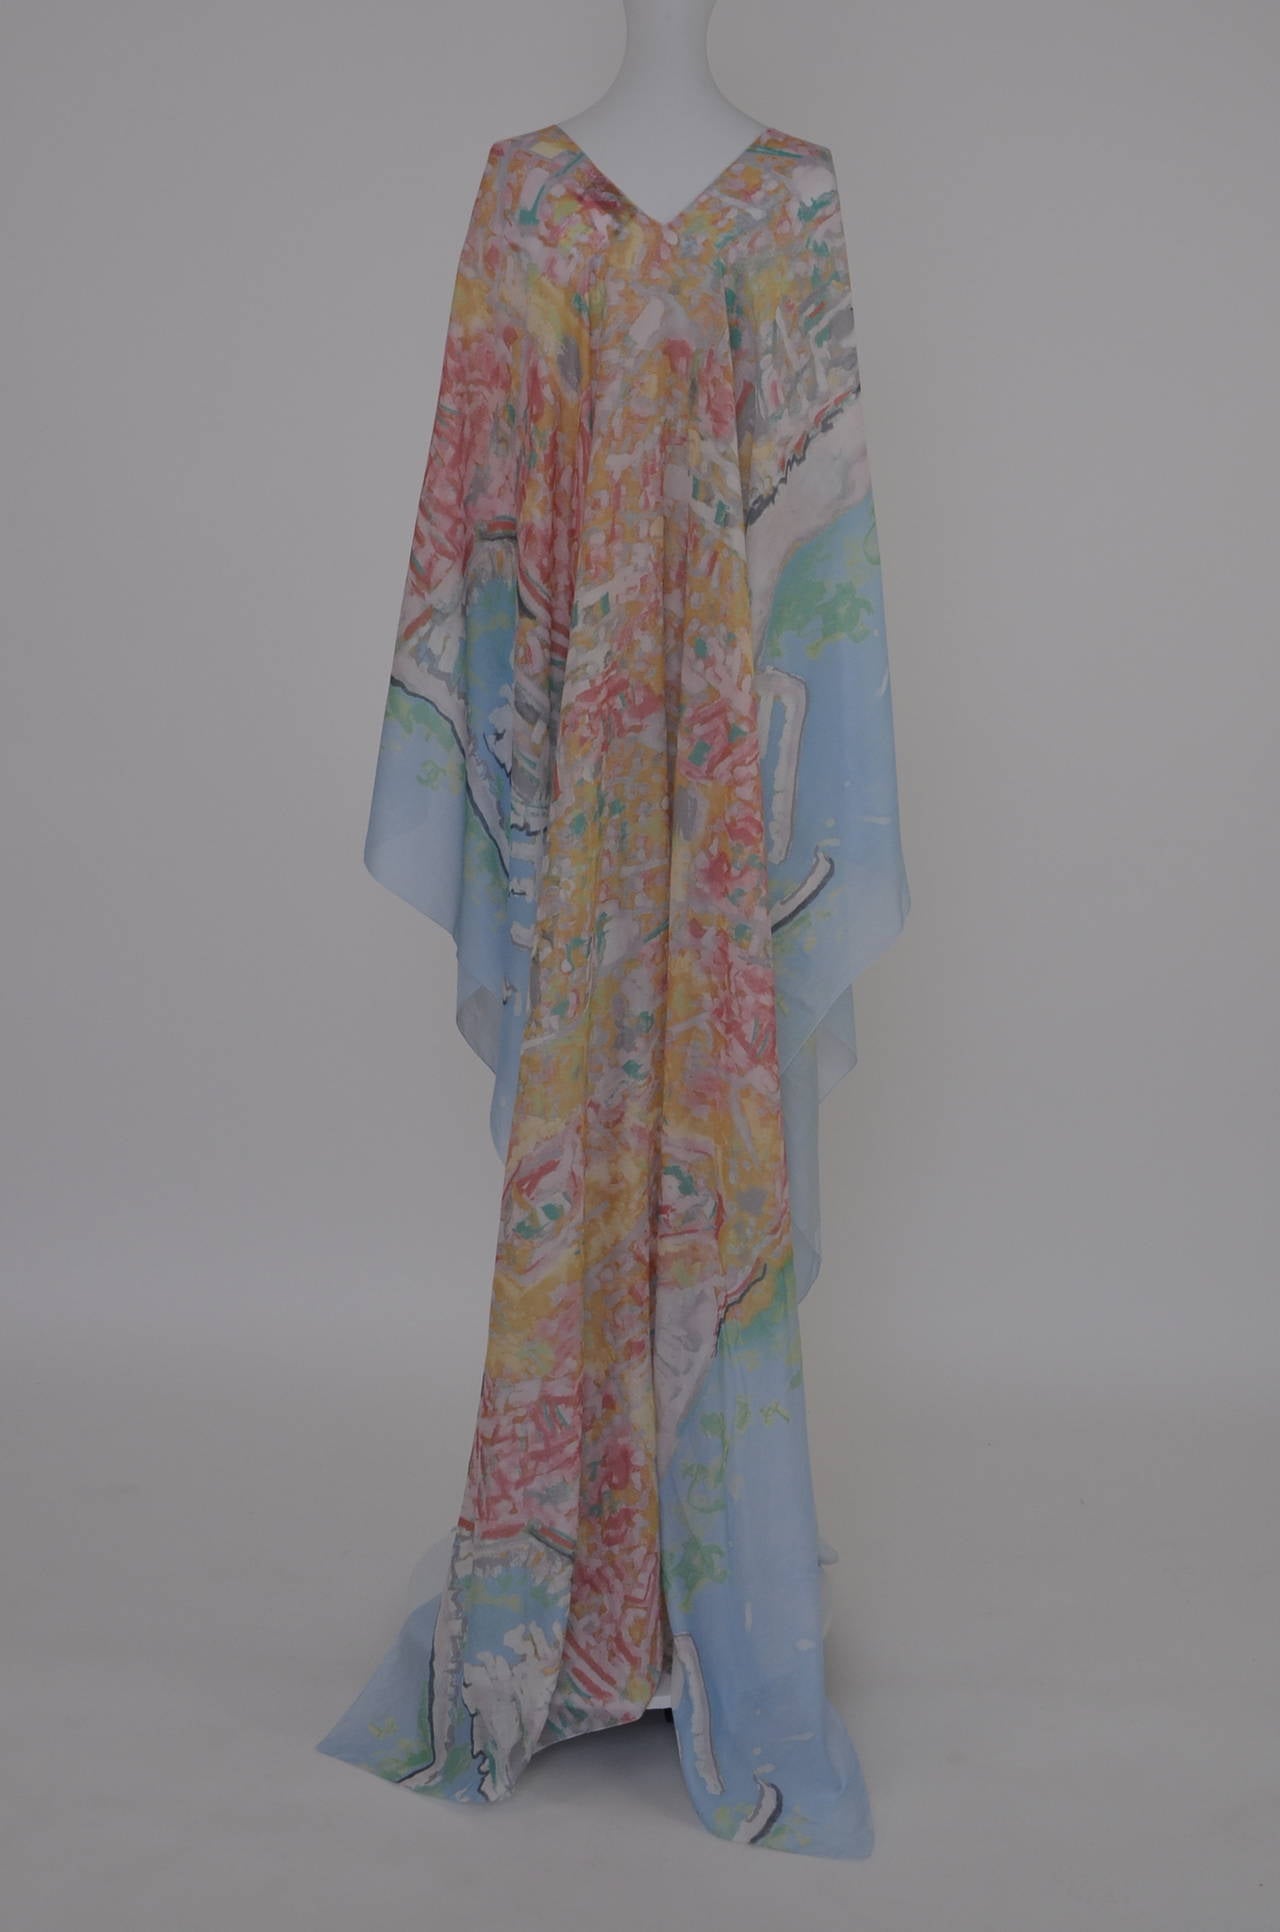 Gorgeous Sexy   Chanel kaftan from 2011 runway collection.Brand new without tags.
Sold out and impossible to find.Light blue with multiple color mix shades in watercolor print.
One size fits all.Tie closure in the front and large opening on the